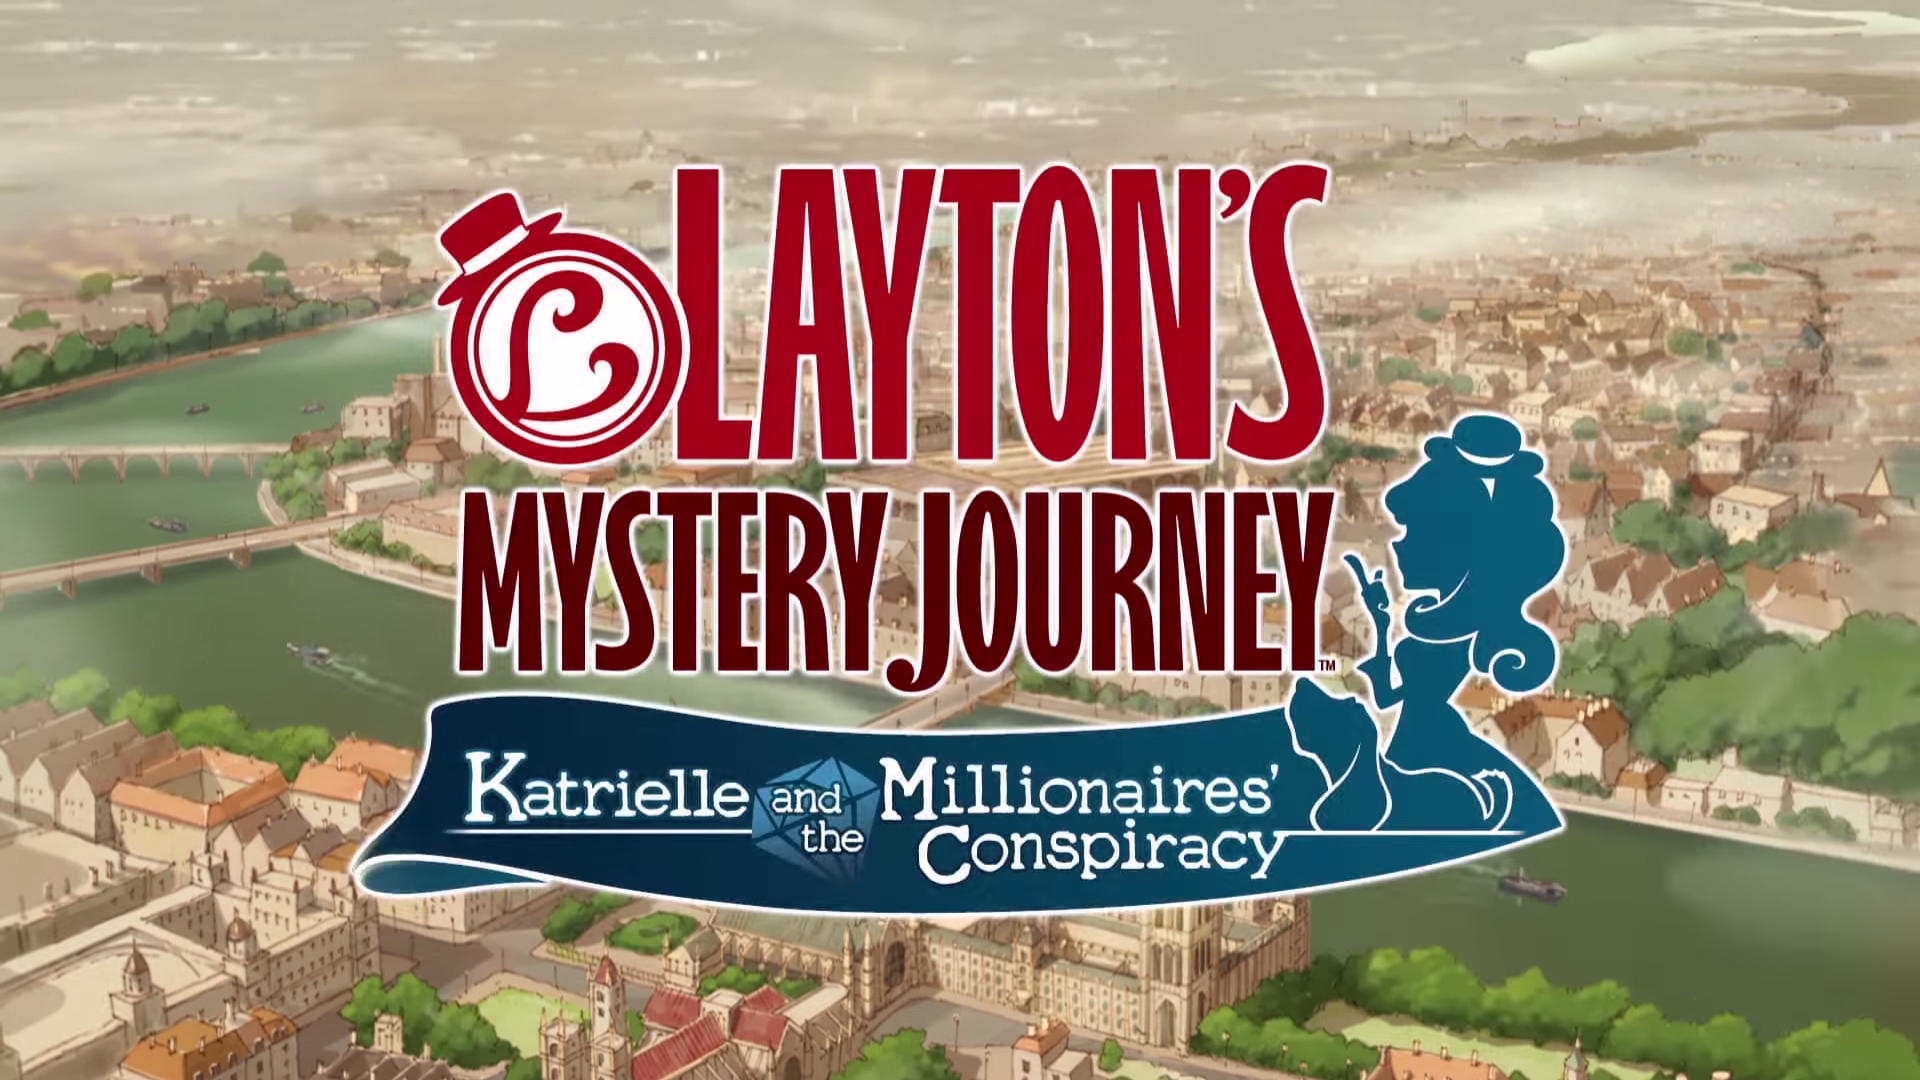 Layton Mystery Journey. Layton's Mystery Journey: Katrielle and the Millionaires' Conspiracy. Mystery journey